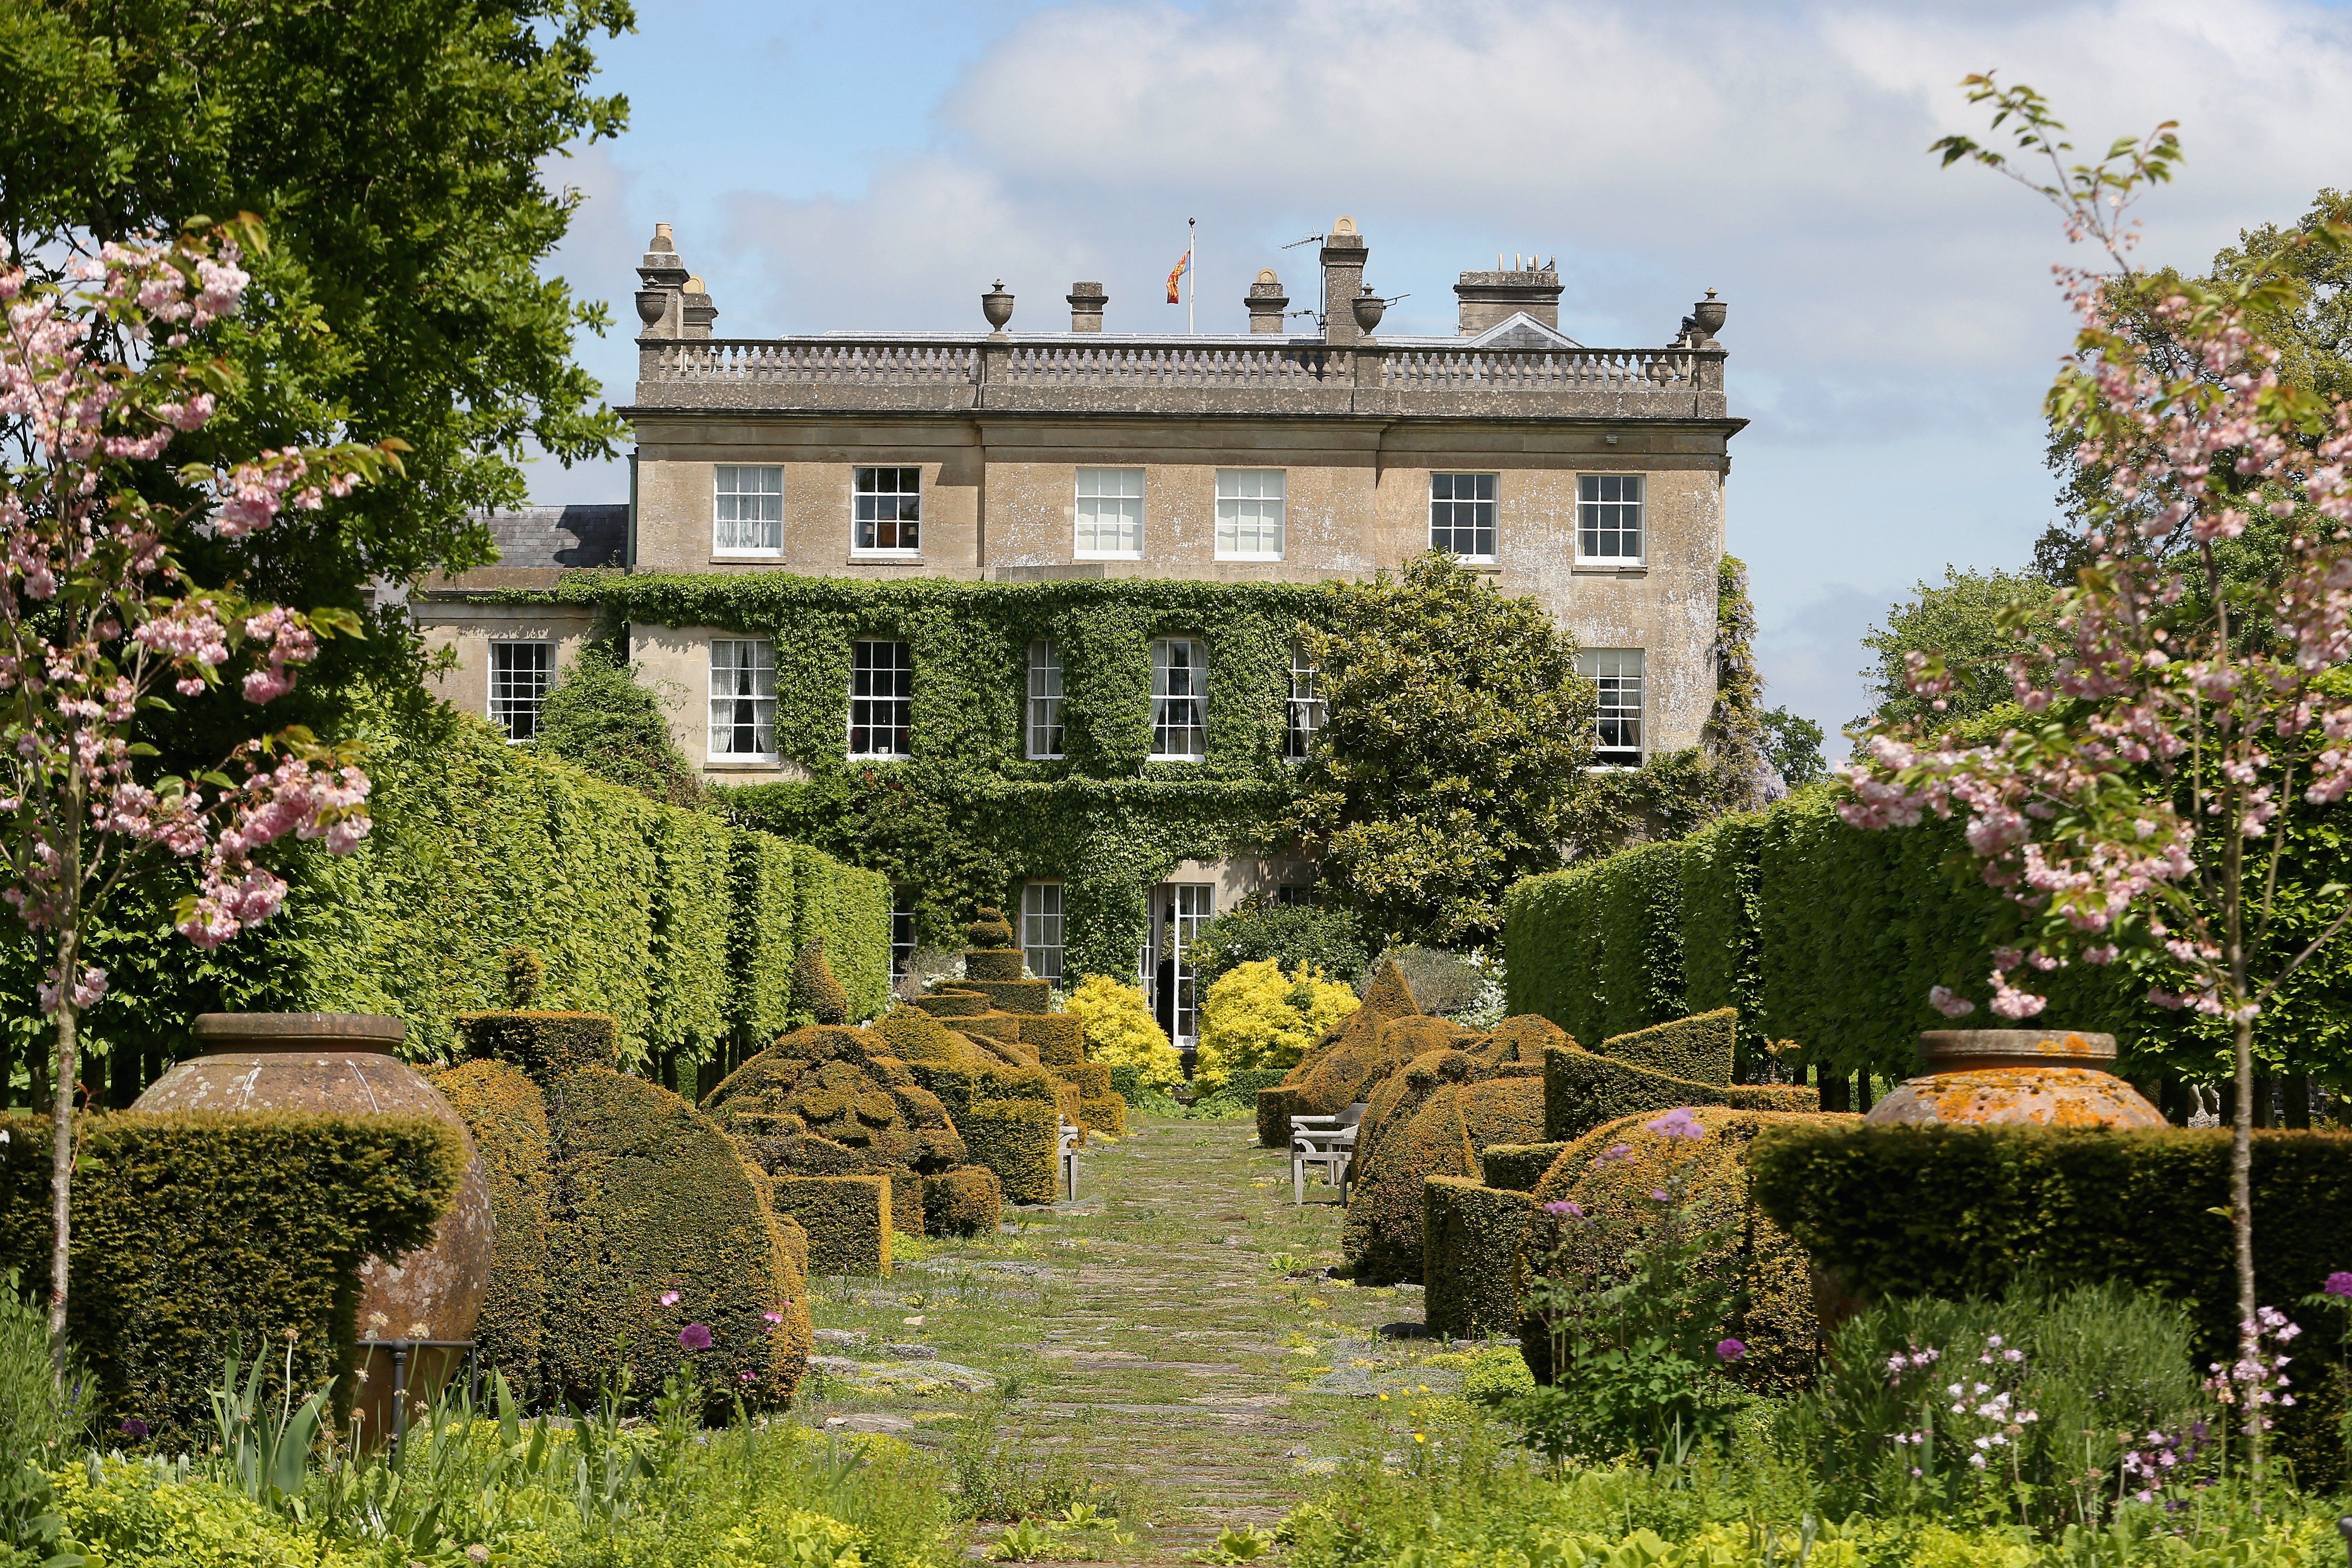 A general view of the gardens at Highgrove House on June 5, 2013 in Tetbury, England. | Source: Getty Images